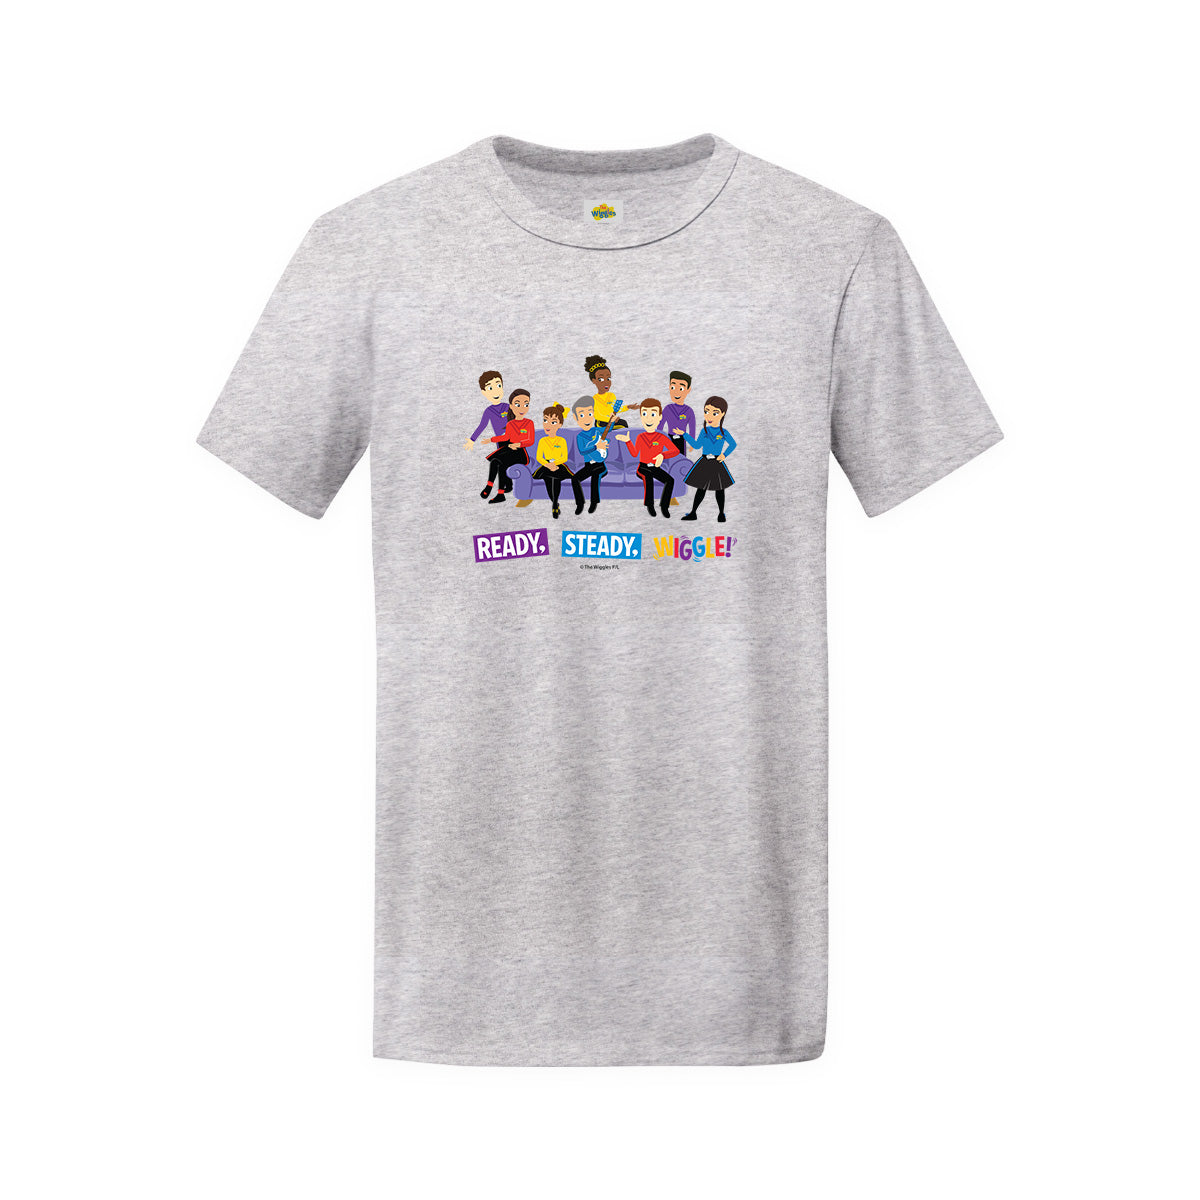 The Wiggles Adult Short Sleeve T-Shirt V1